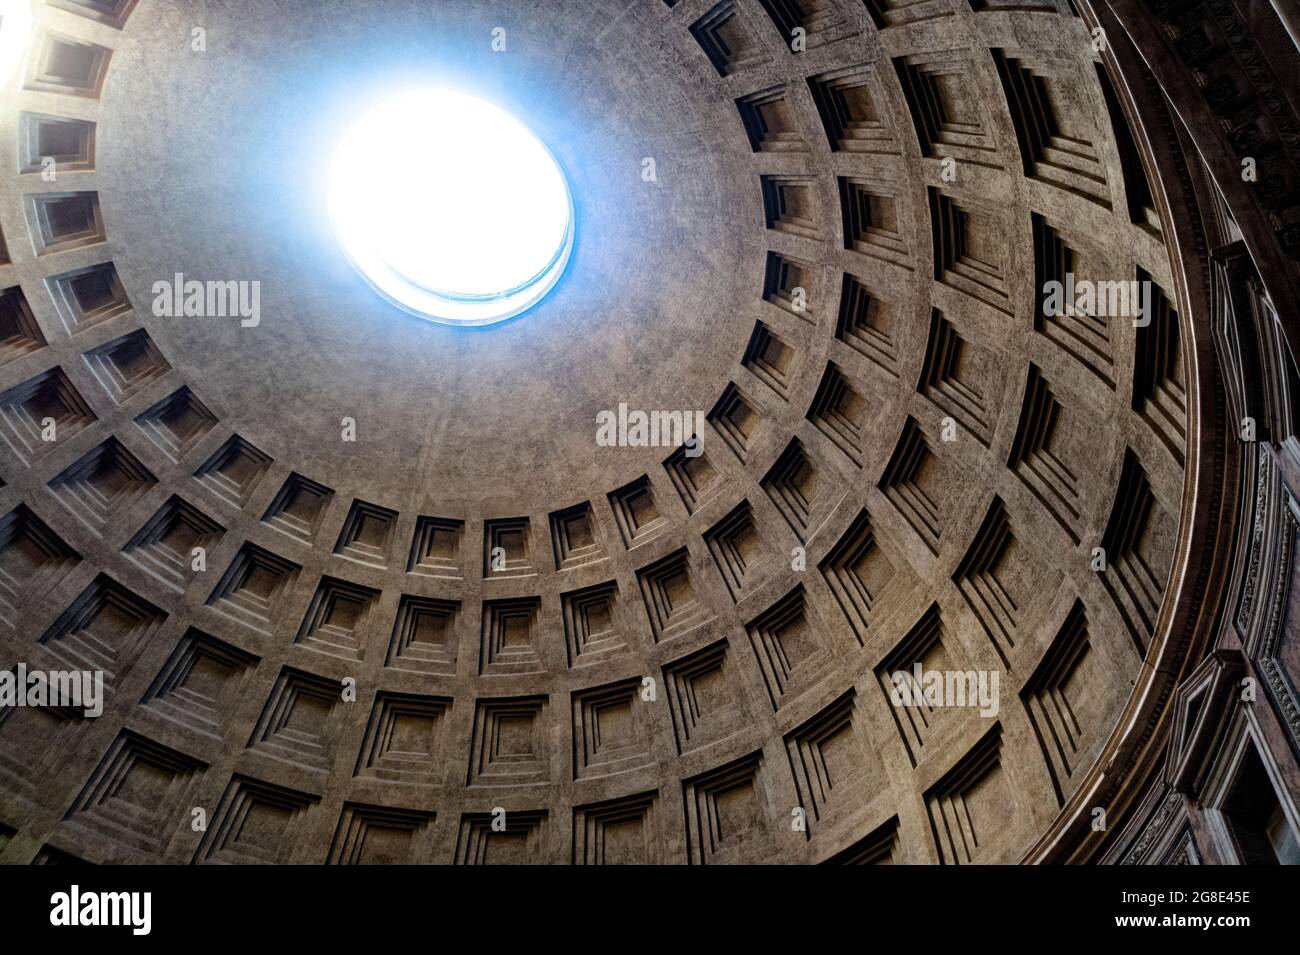 Europe - Italy, capital city Rome: A view of the Pantheon's dome which is considered the world's largest unreinforced concrete dome. Stock Photo